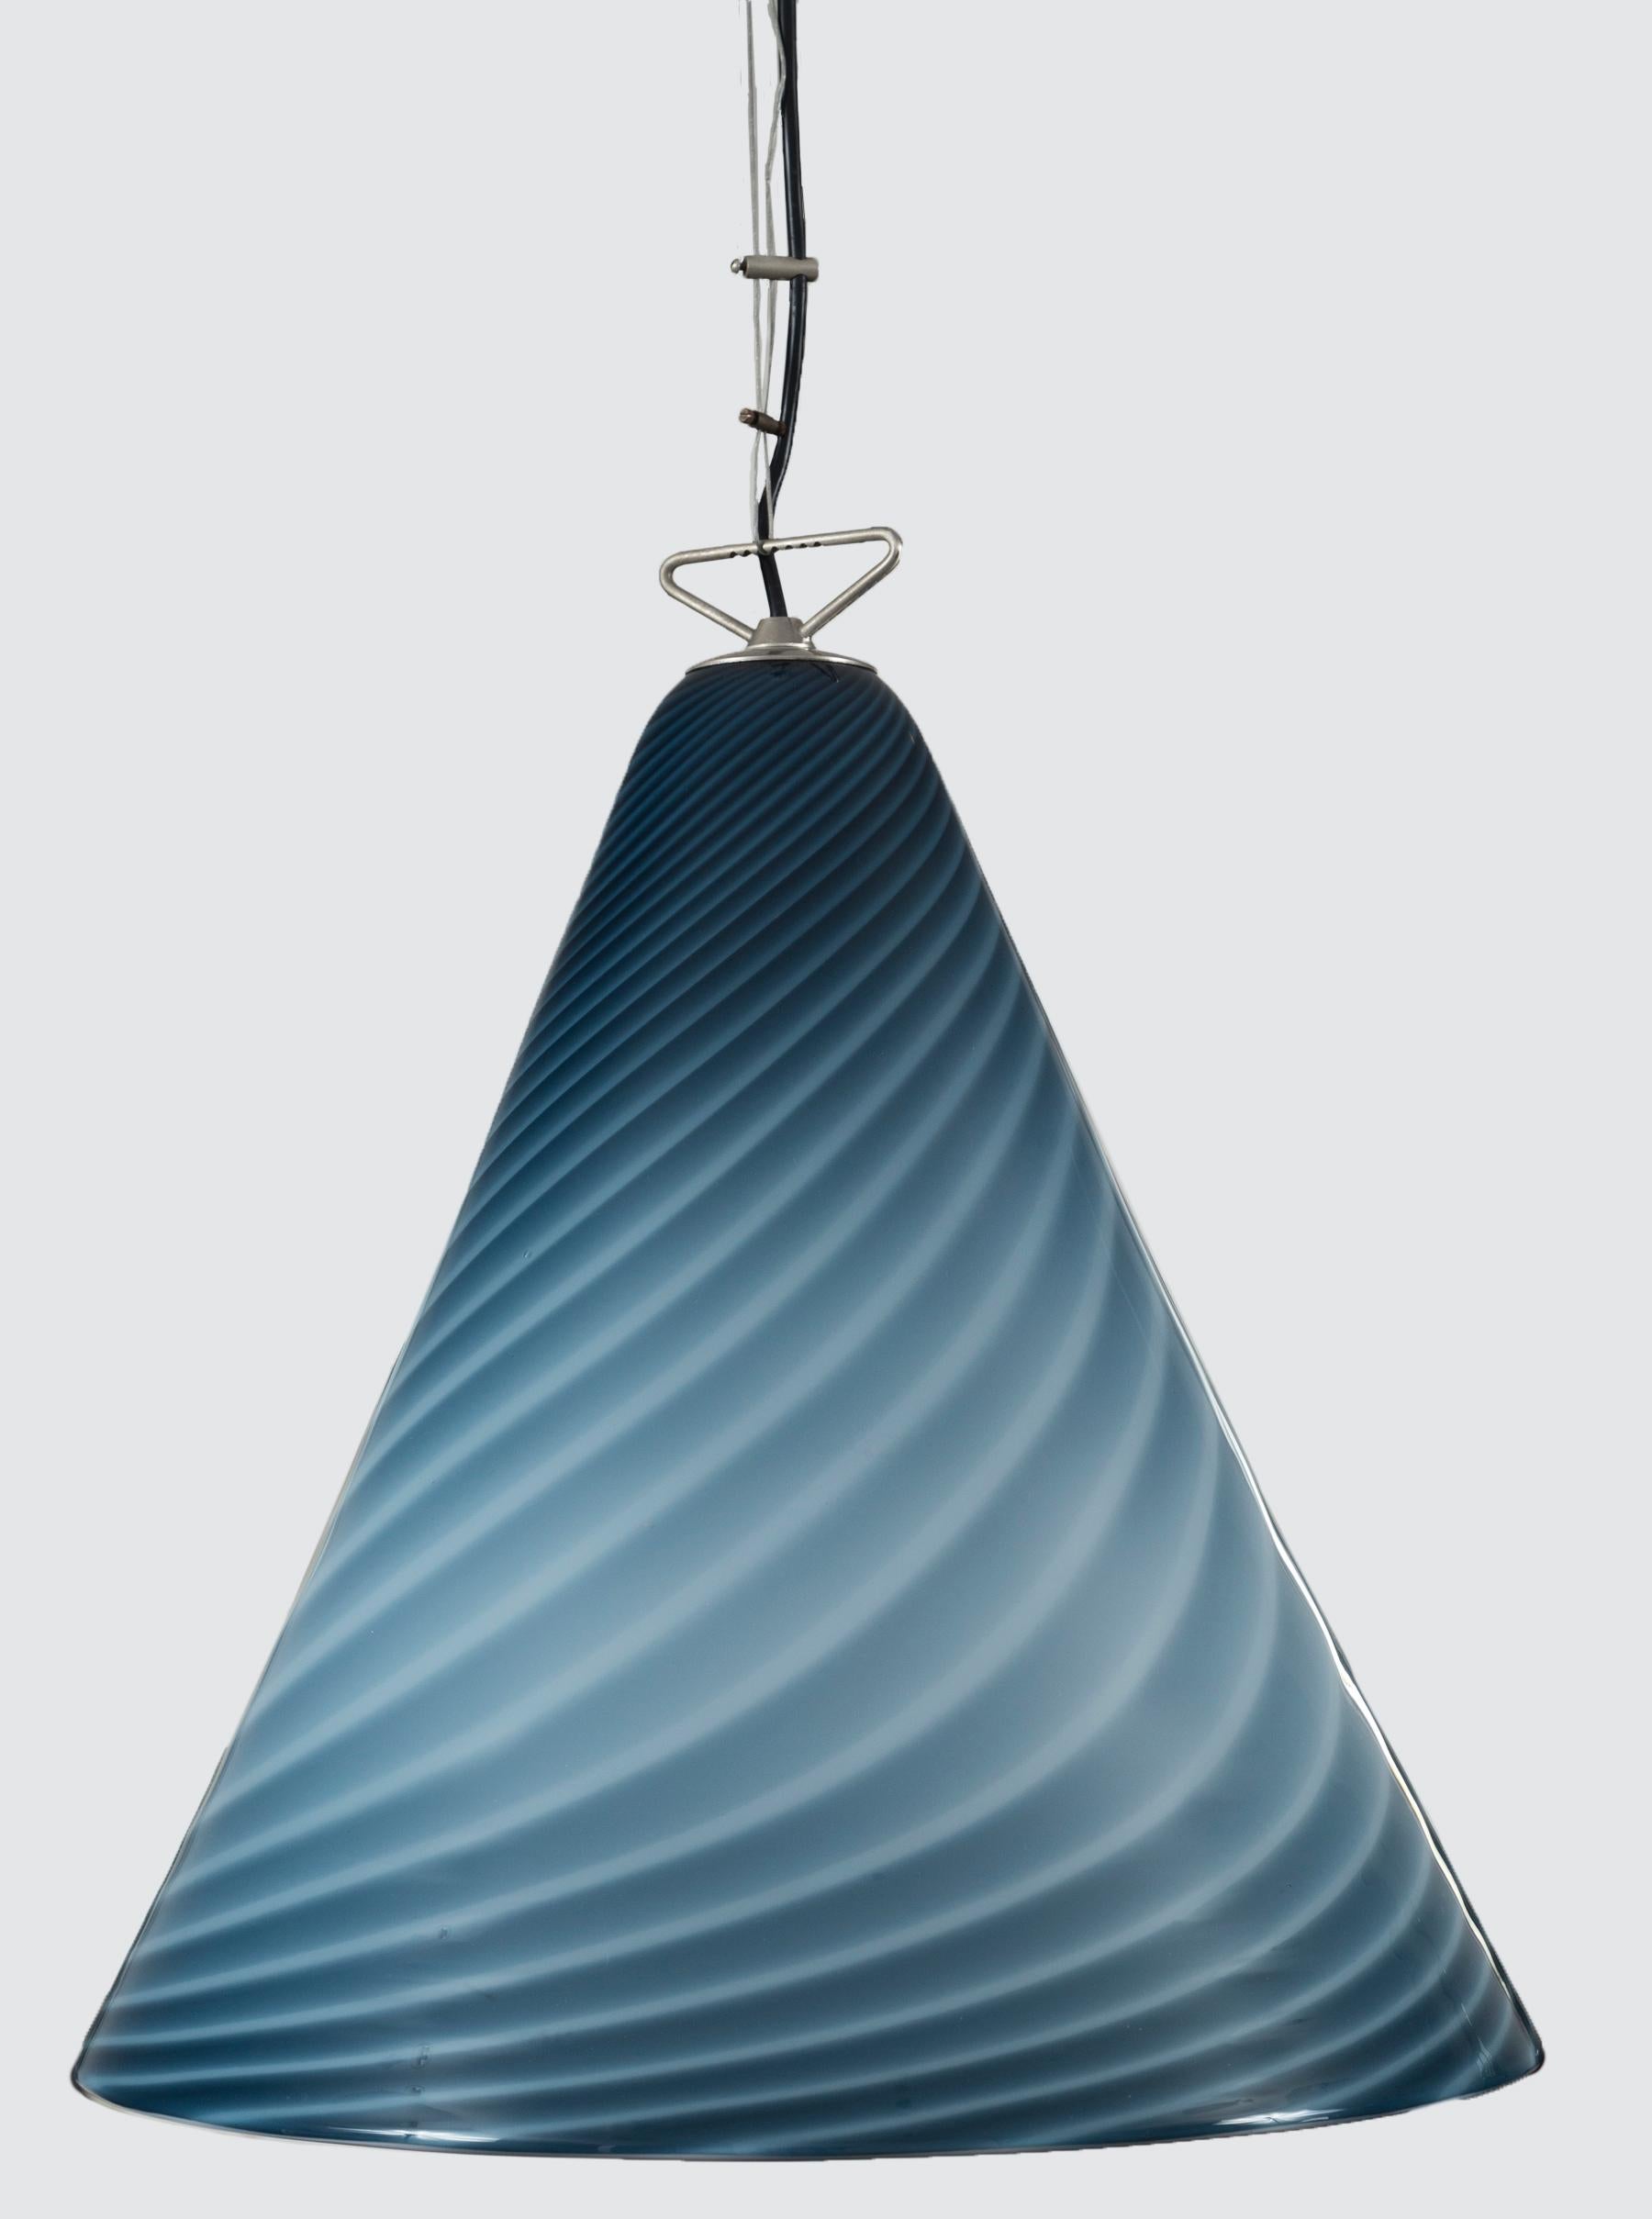 Rare sleek & oversized modern conical form Murano pendant, blown in a beautiful swirl technique incorporating two tones greige blues. Shown with its orginal matte silver hardware.

This is sold as re-electrified with UL certification and hung